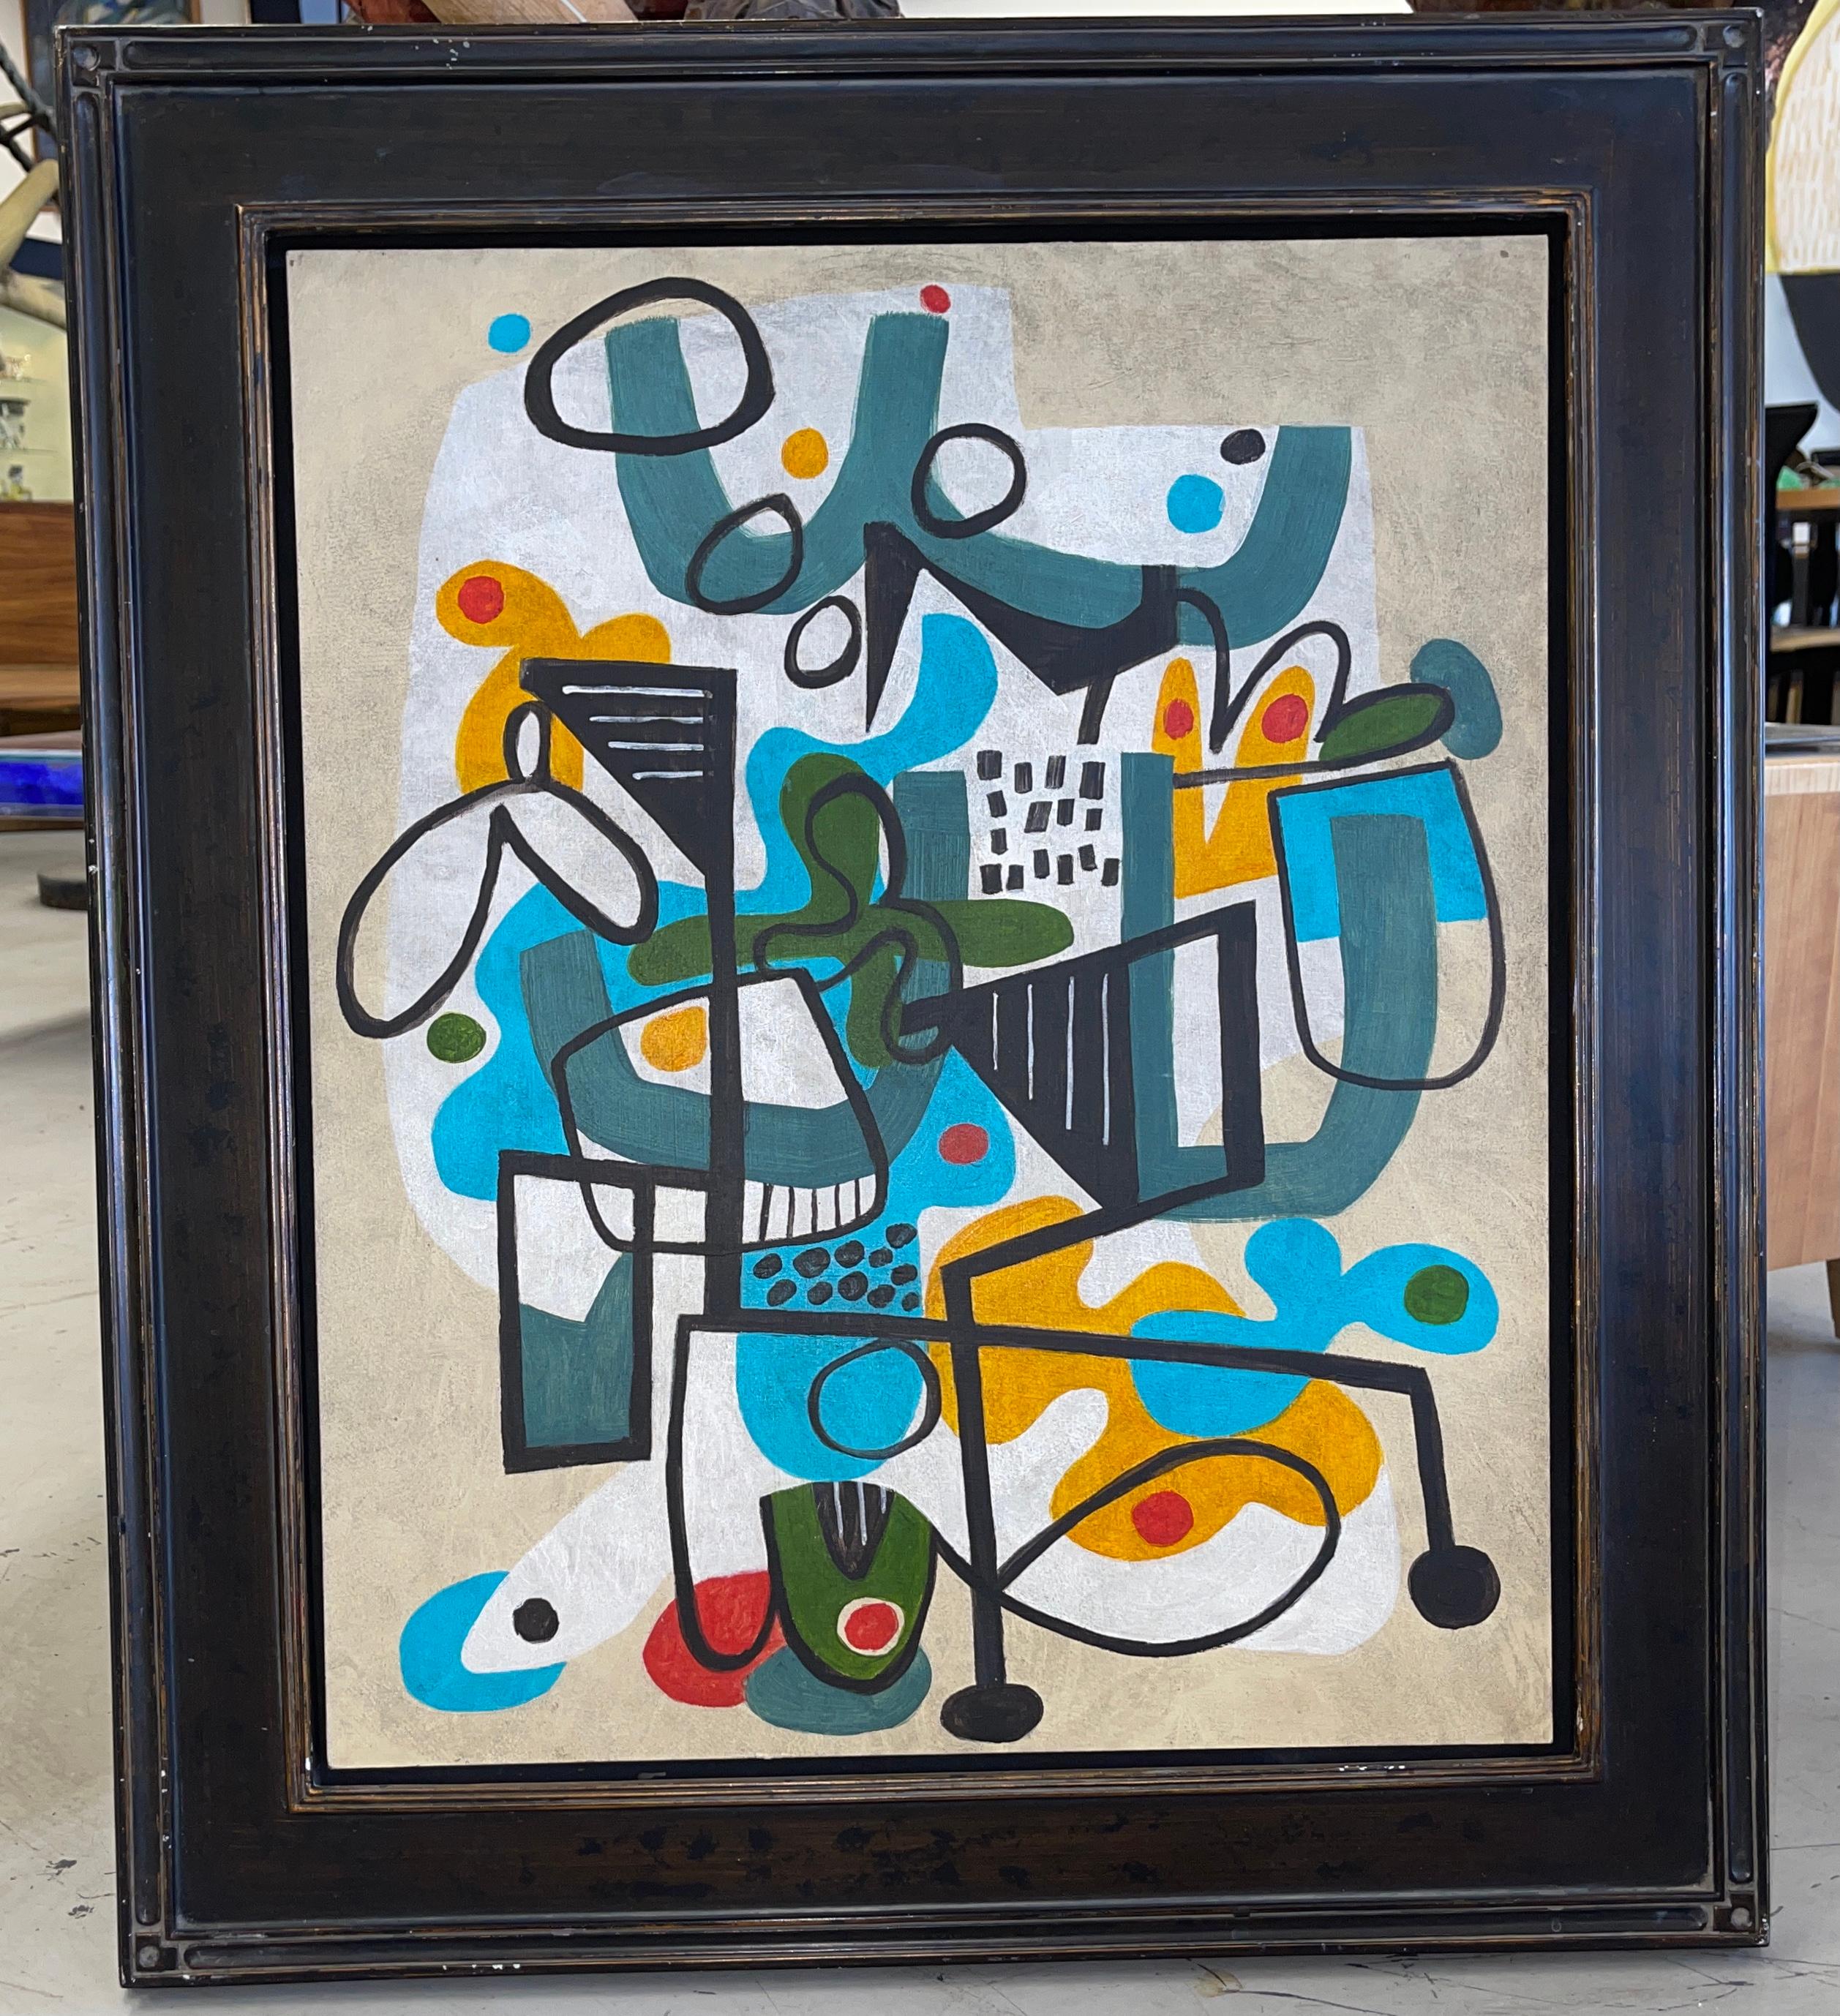 Wonderful freeform organic shaped abstract by the noted Palm Springs artist Gary Janis. Our gallery is pleased to represent this talented artist in our area. We have a few of his works for sale. This one is from 2019 and signed and dated on the